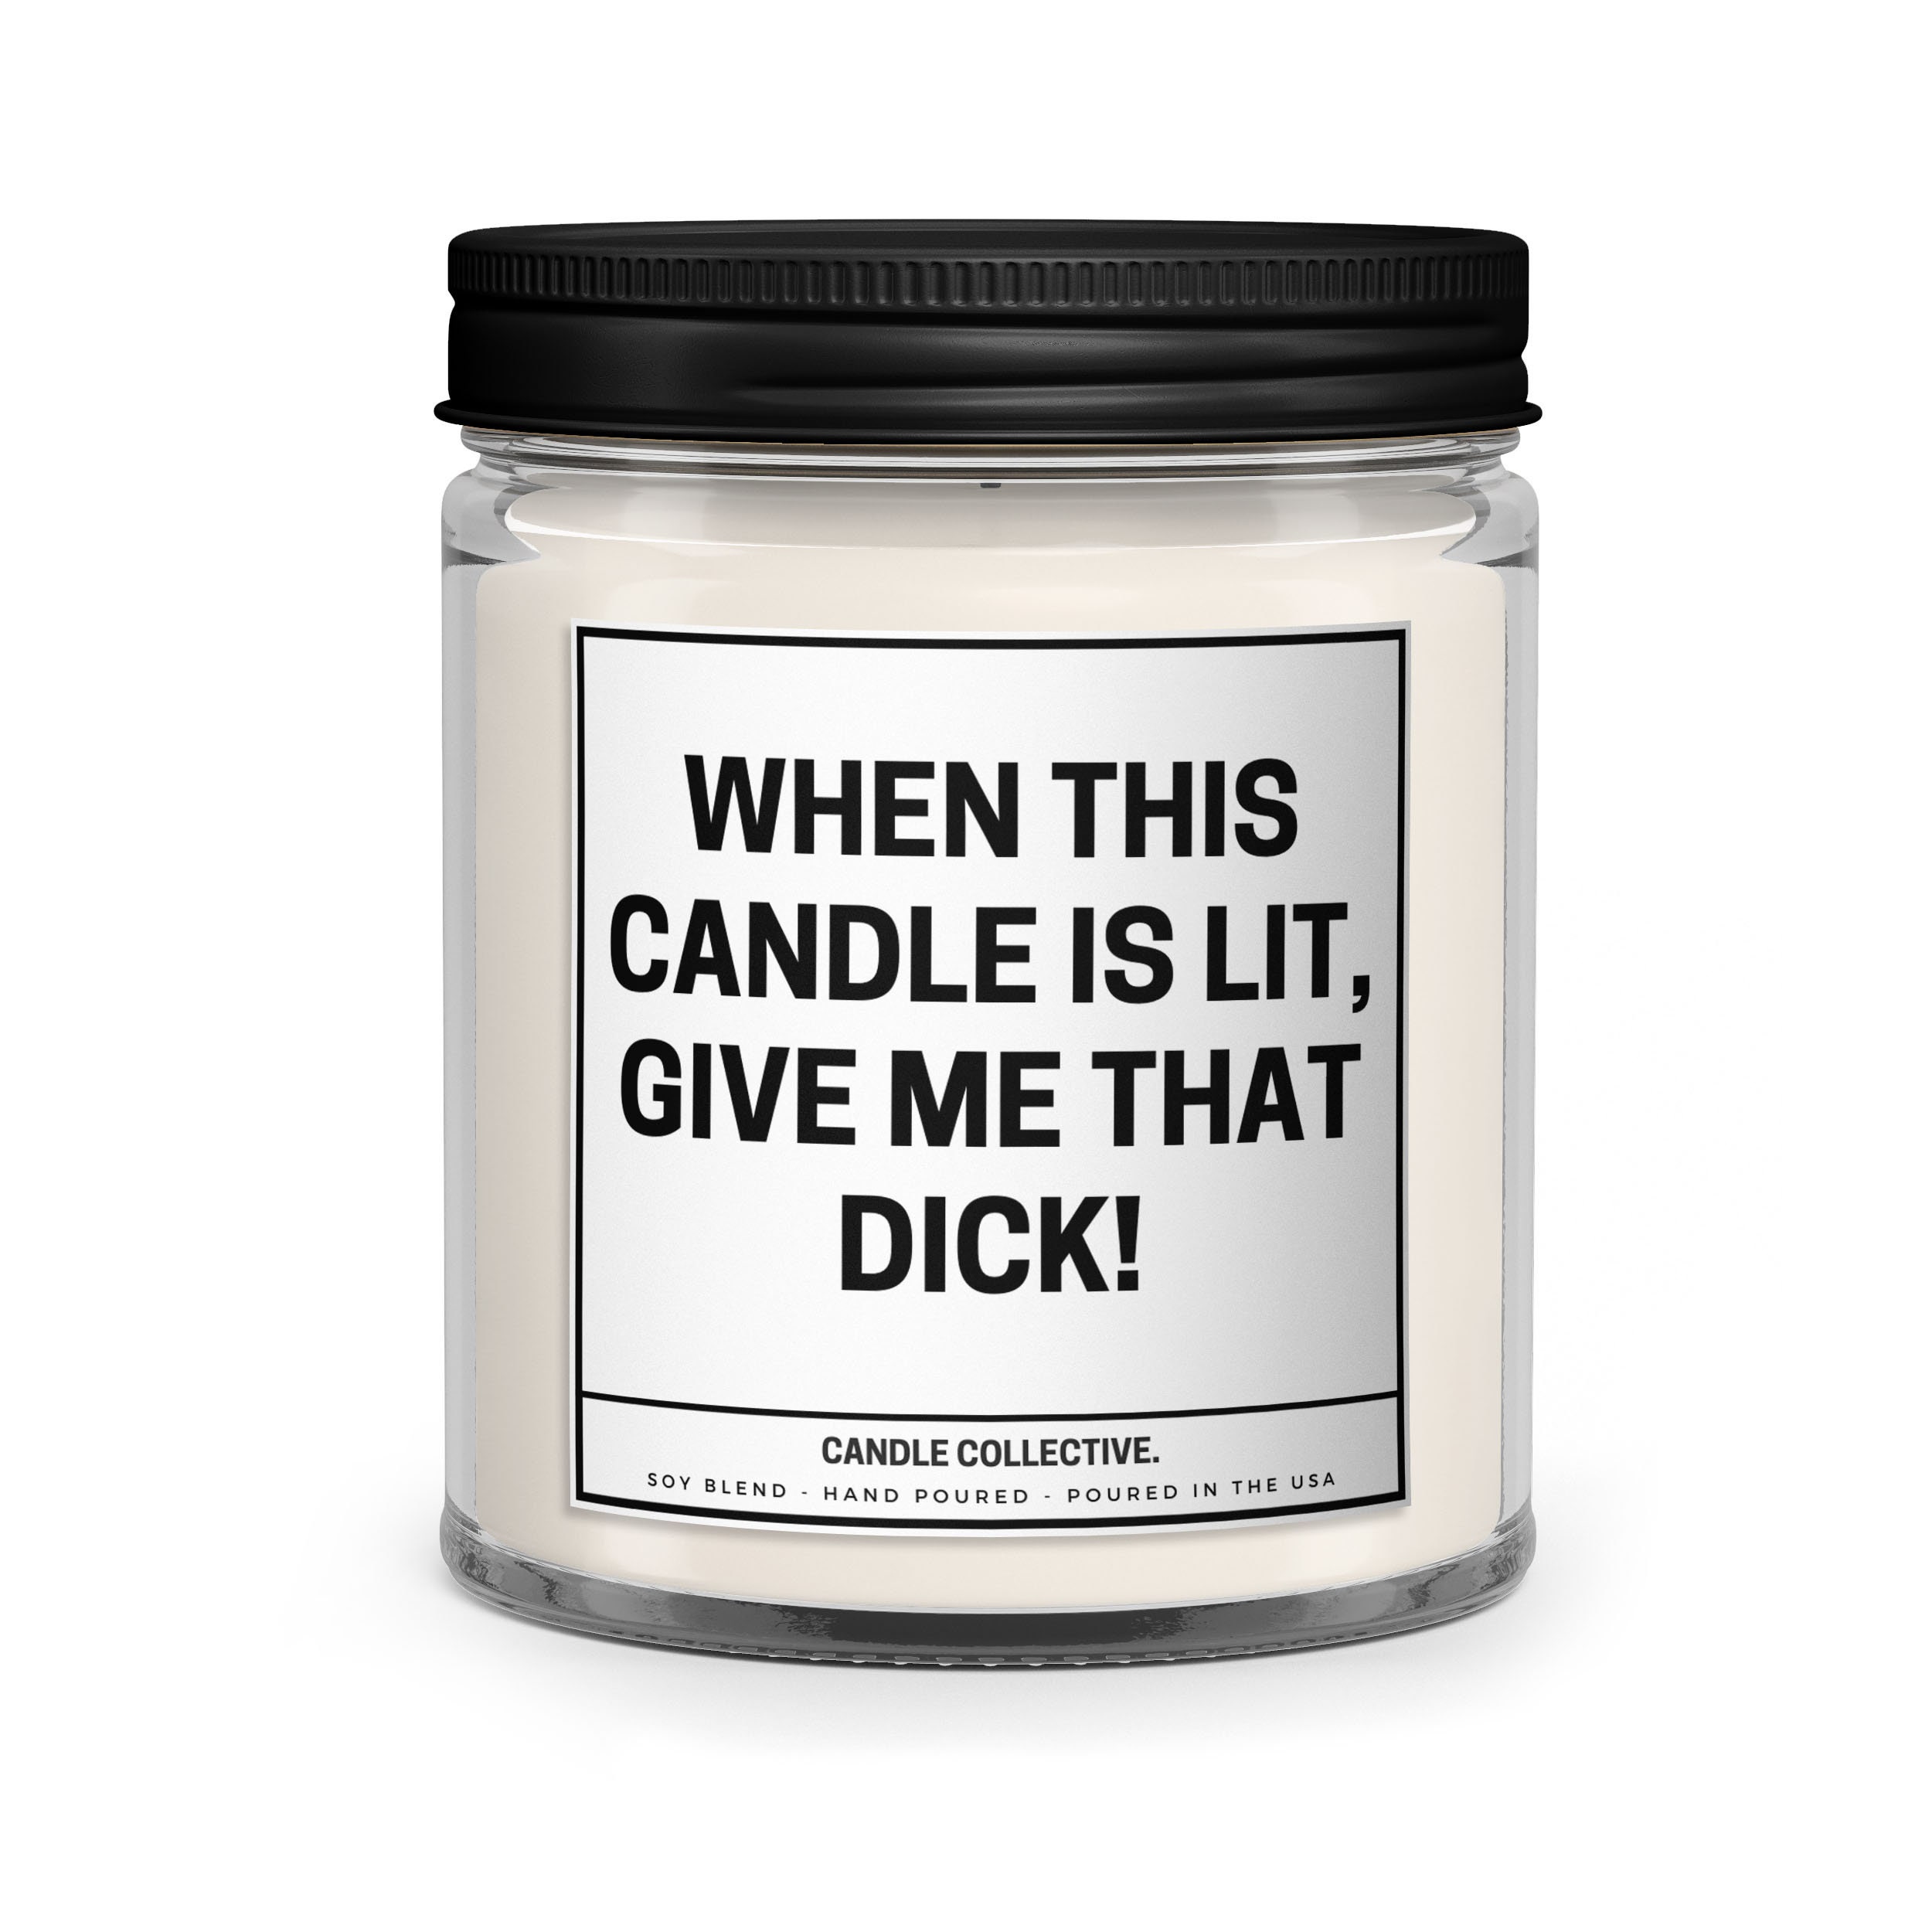 Give Me That Dick Candle - Set the Mood